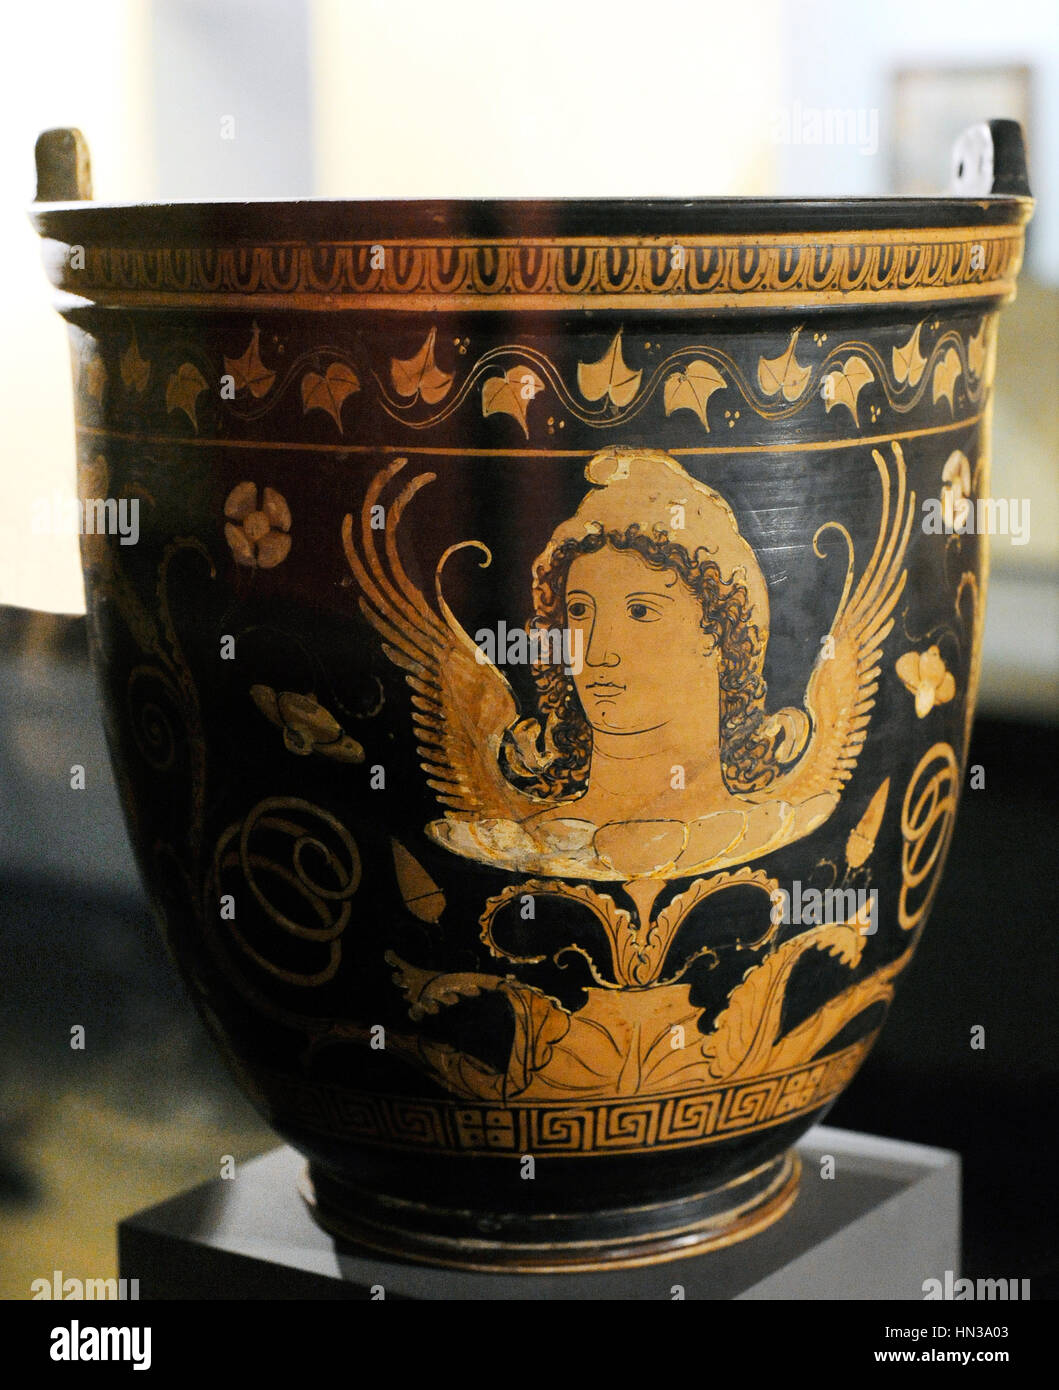 Situla (bucket) with decoration depicting Adonis emerging from a flowering plant shoot. Made in Puglia. From Ruvo di Puglia. Painter of the Dublin Situlae. 350-340 BC. Jatta National Archaeological Museum. Ruvo di Puglia. Italy. Stock Photo